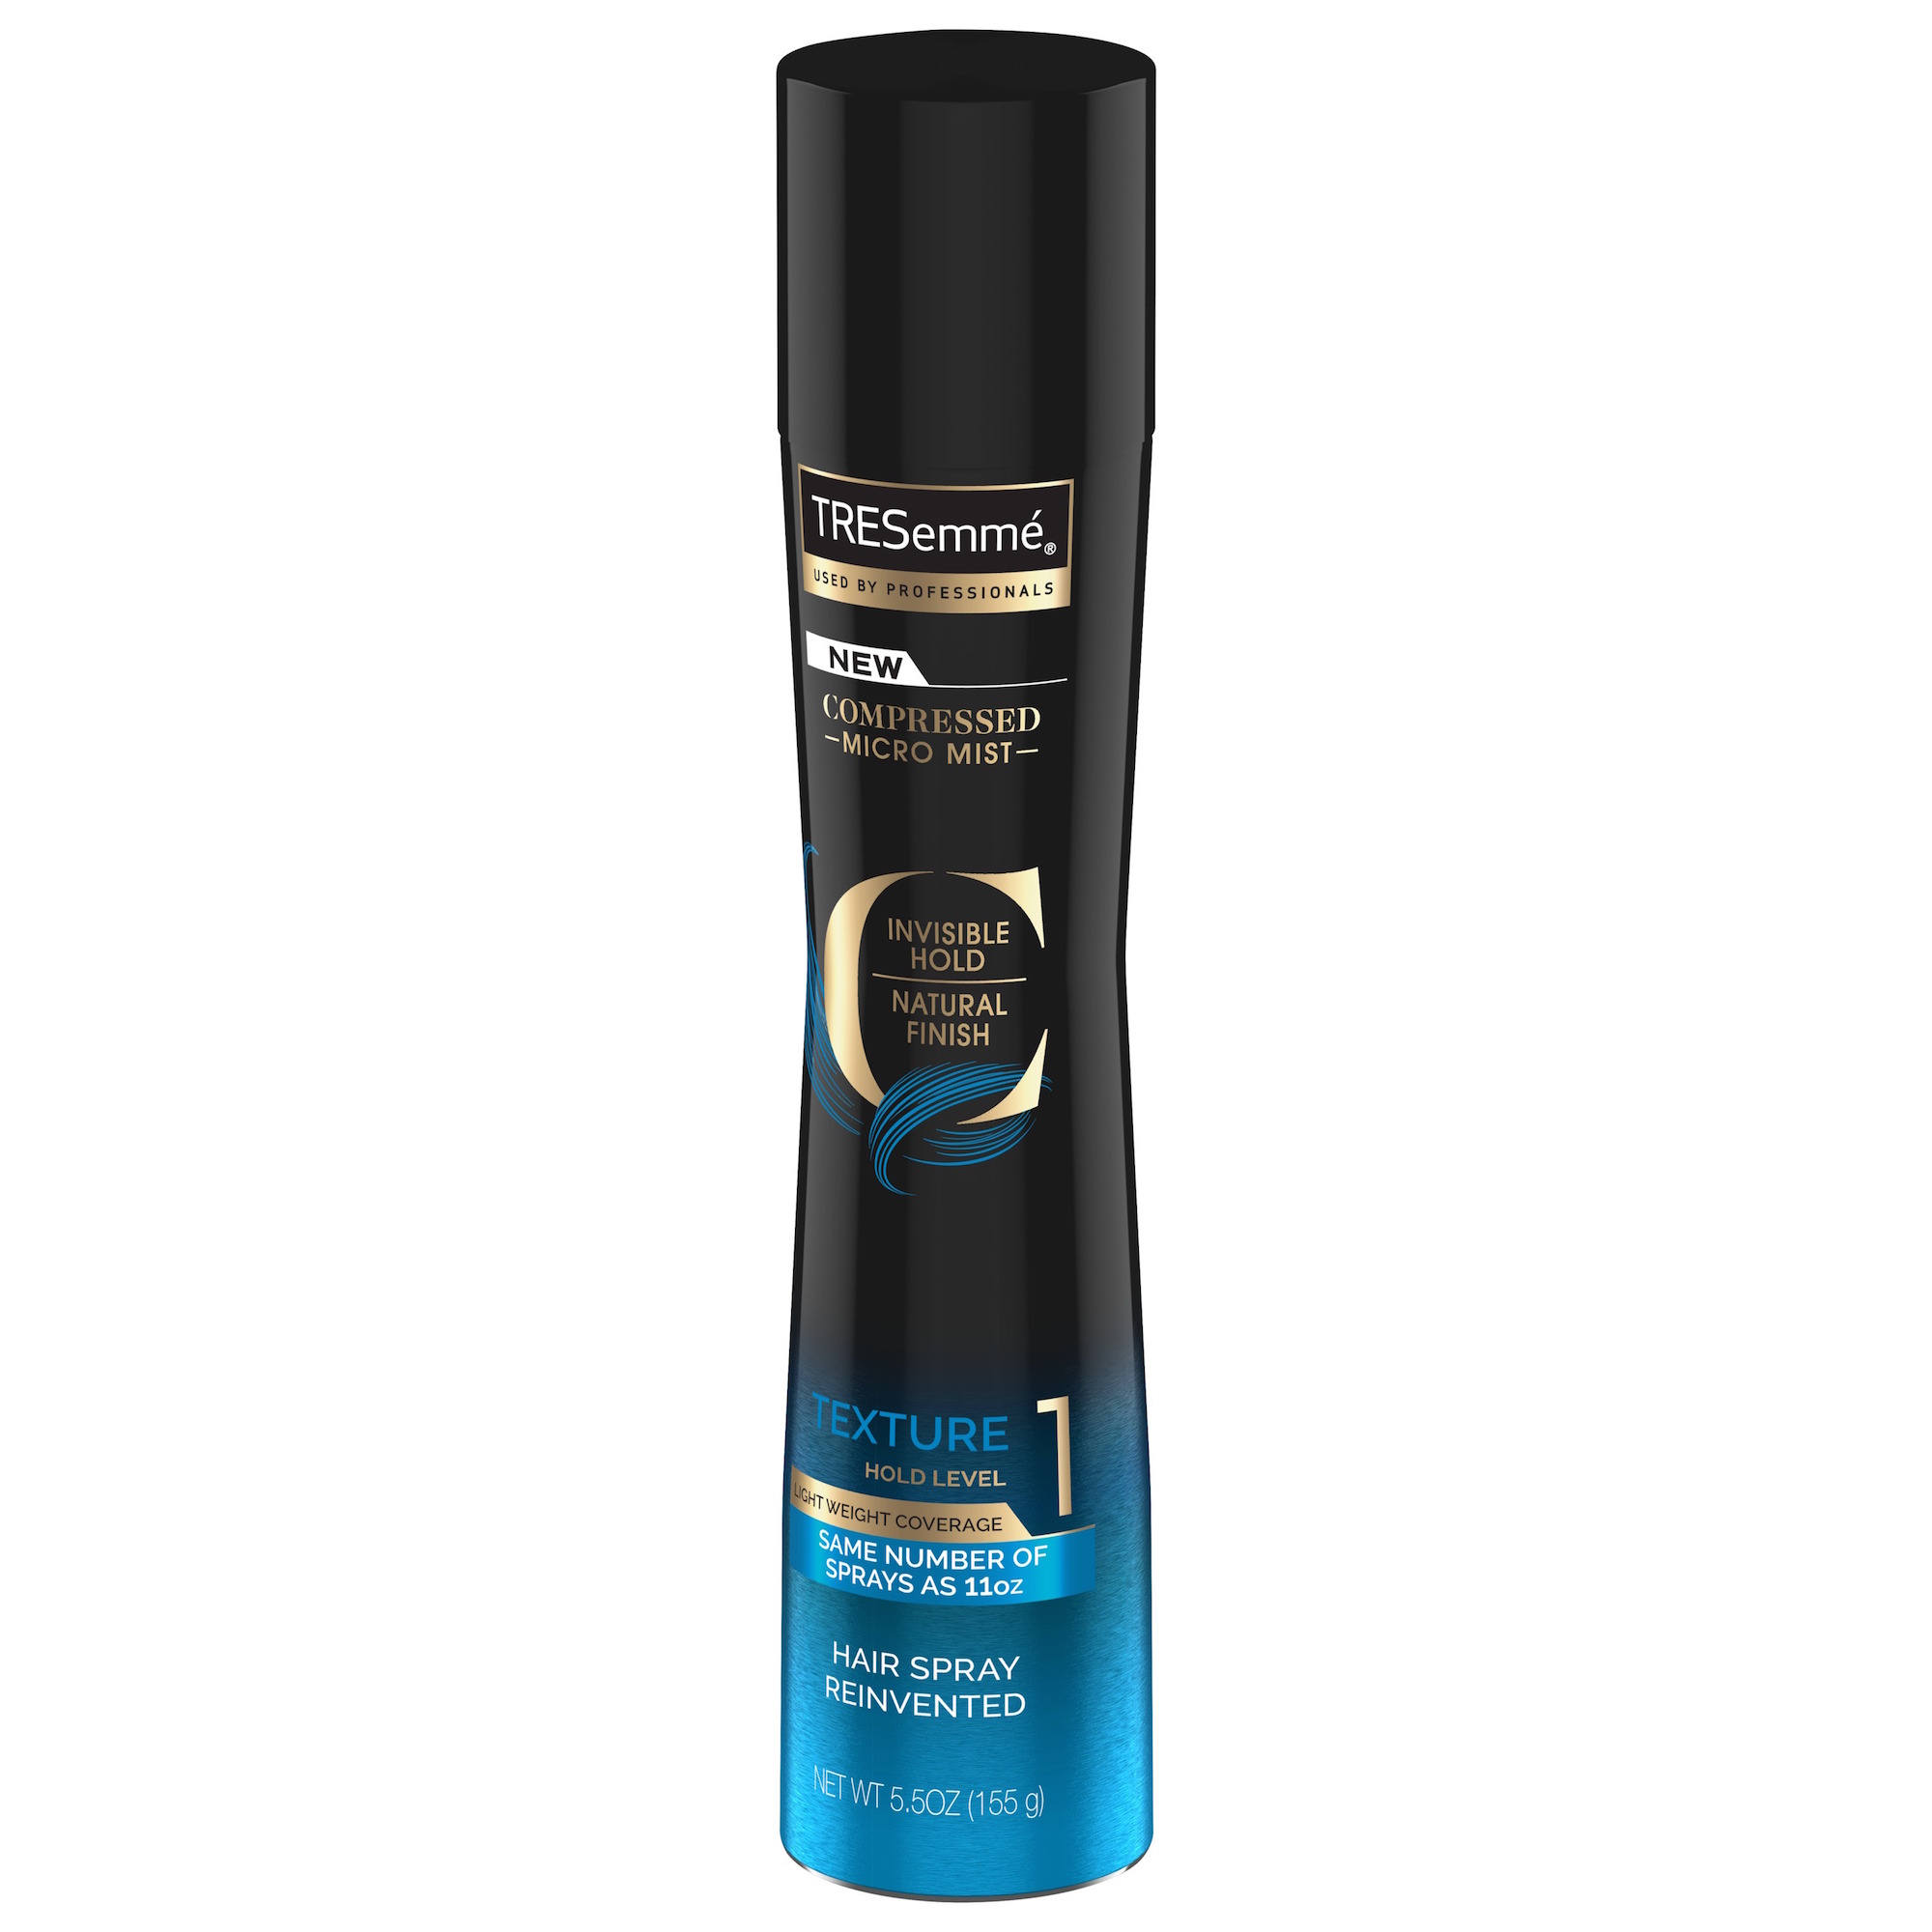 Tresemme Compressed Micro Mist Flexible Hold Hairspray Texture Hold Level 1 5.5 oz - image 4 of 5